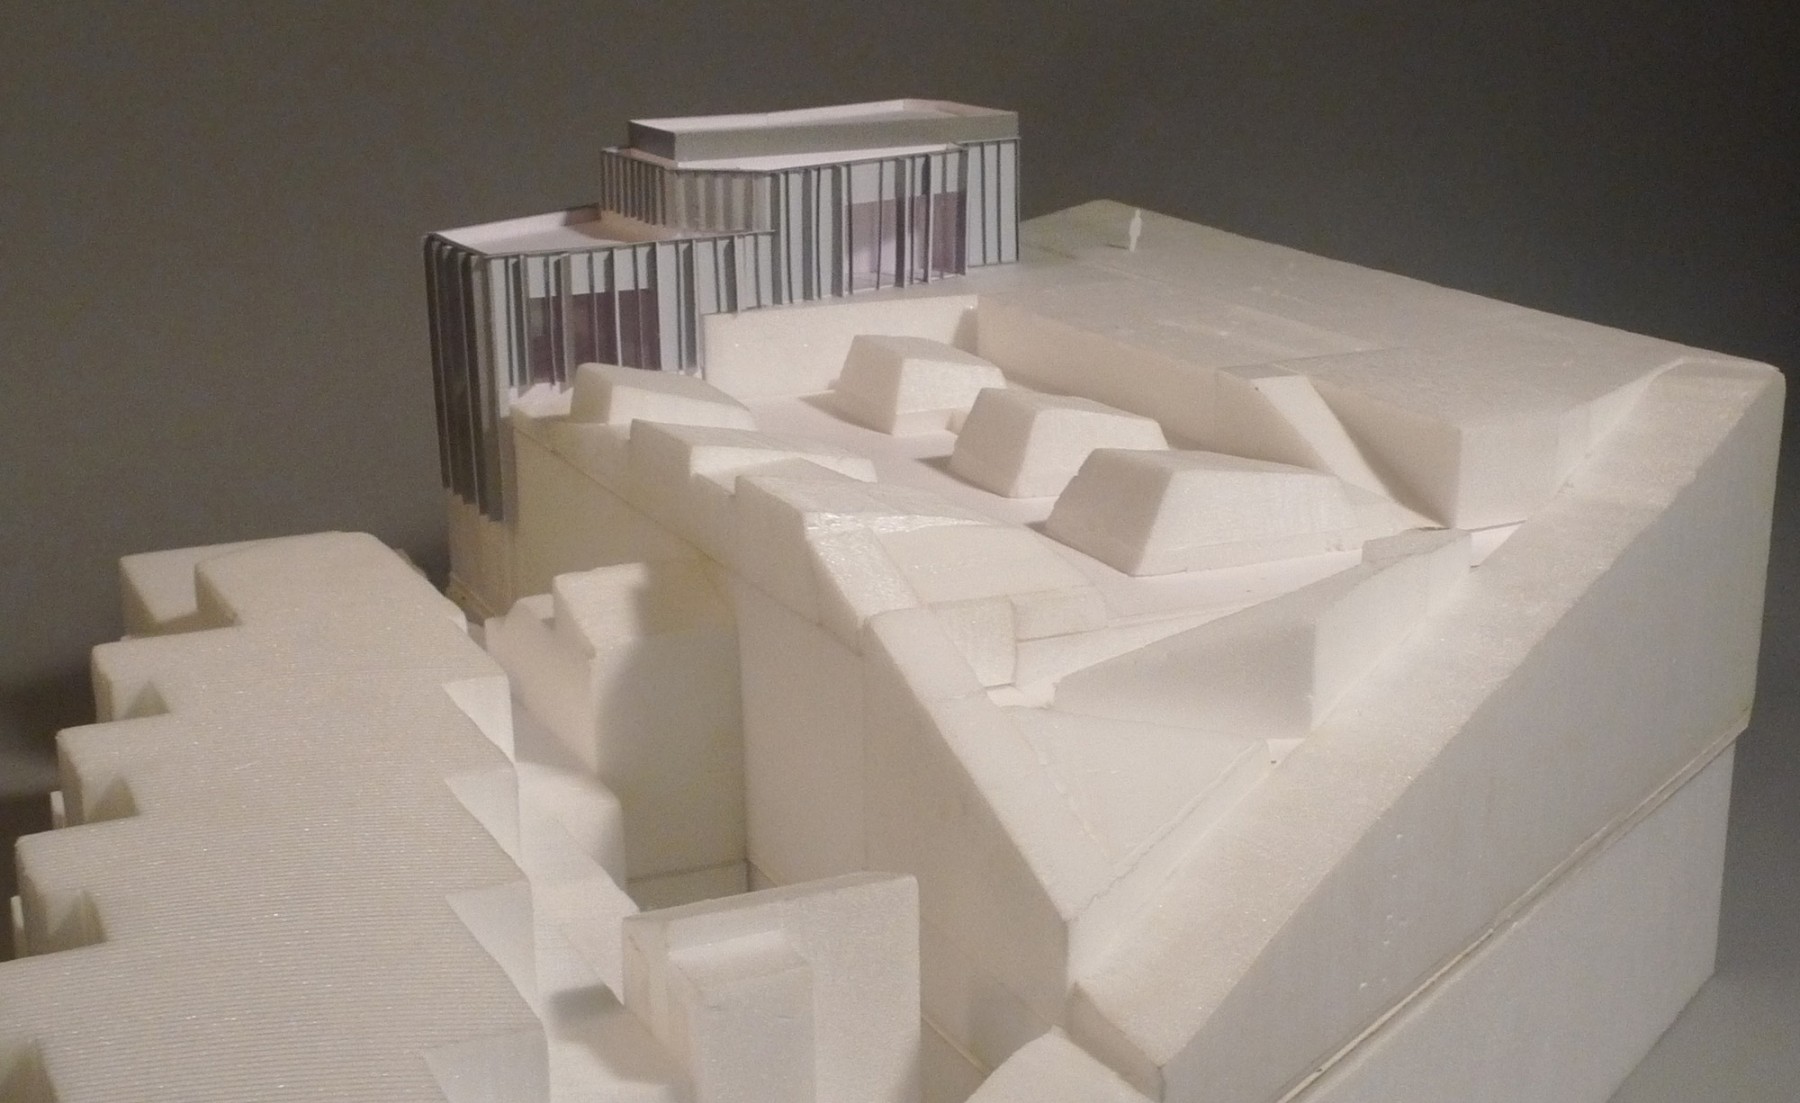 Jamie-Fobert-Architects-extension-to-Tate-St-Ives-foam-model-exterior- faience-pavilion